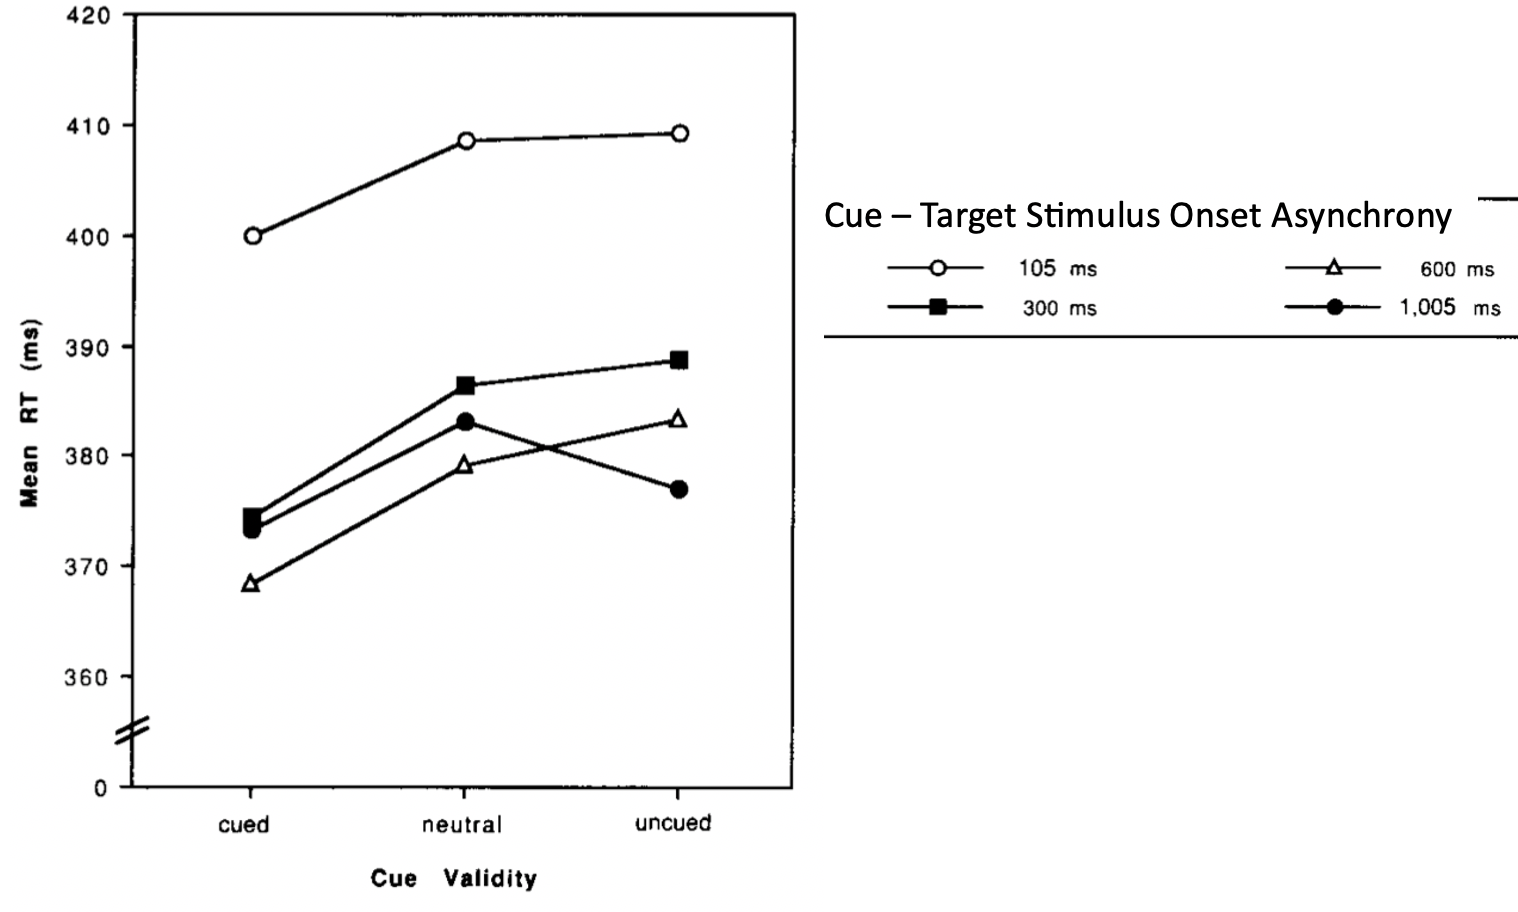 Response time against cue type, for four different stimulus onset asynchronies